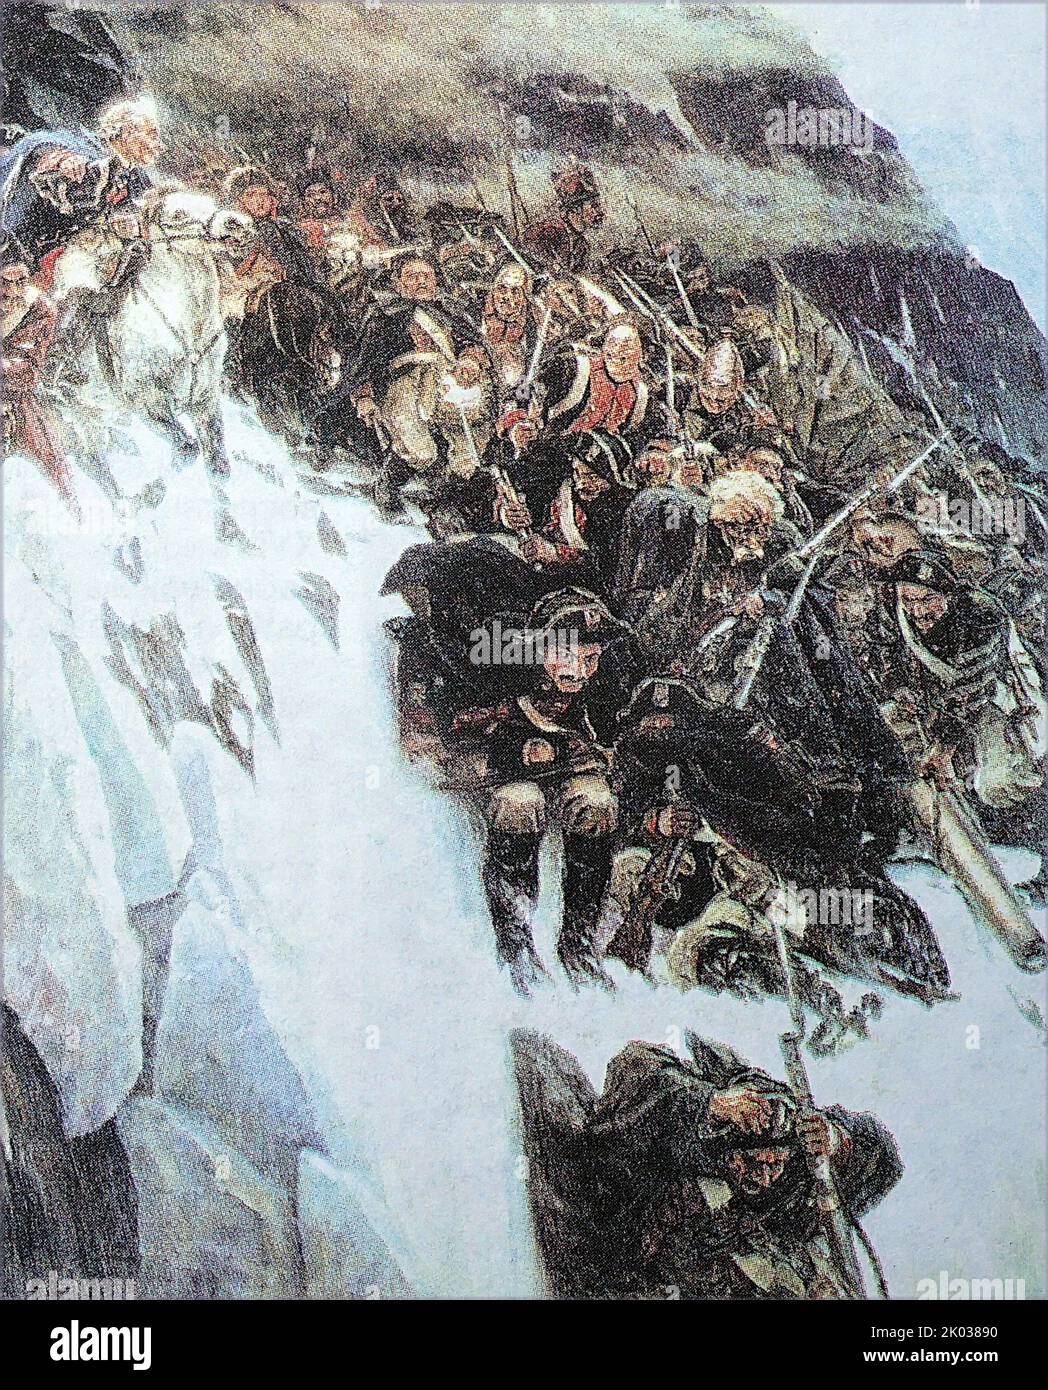 Suvorov Crossing the Alps in 1799 by Vasily Surikov; 1899. Count Alexander Suvorov (1729-1800) was a Russian field marshal who commanded a Russo-Austrian force in Italy in 1799. Ordered to relieve Russian troops in Switzerland, he famously marched across the Alps. Stock Photo